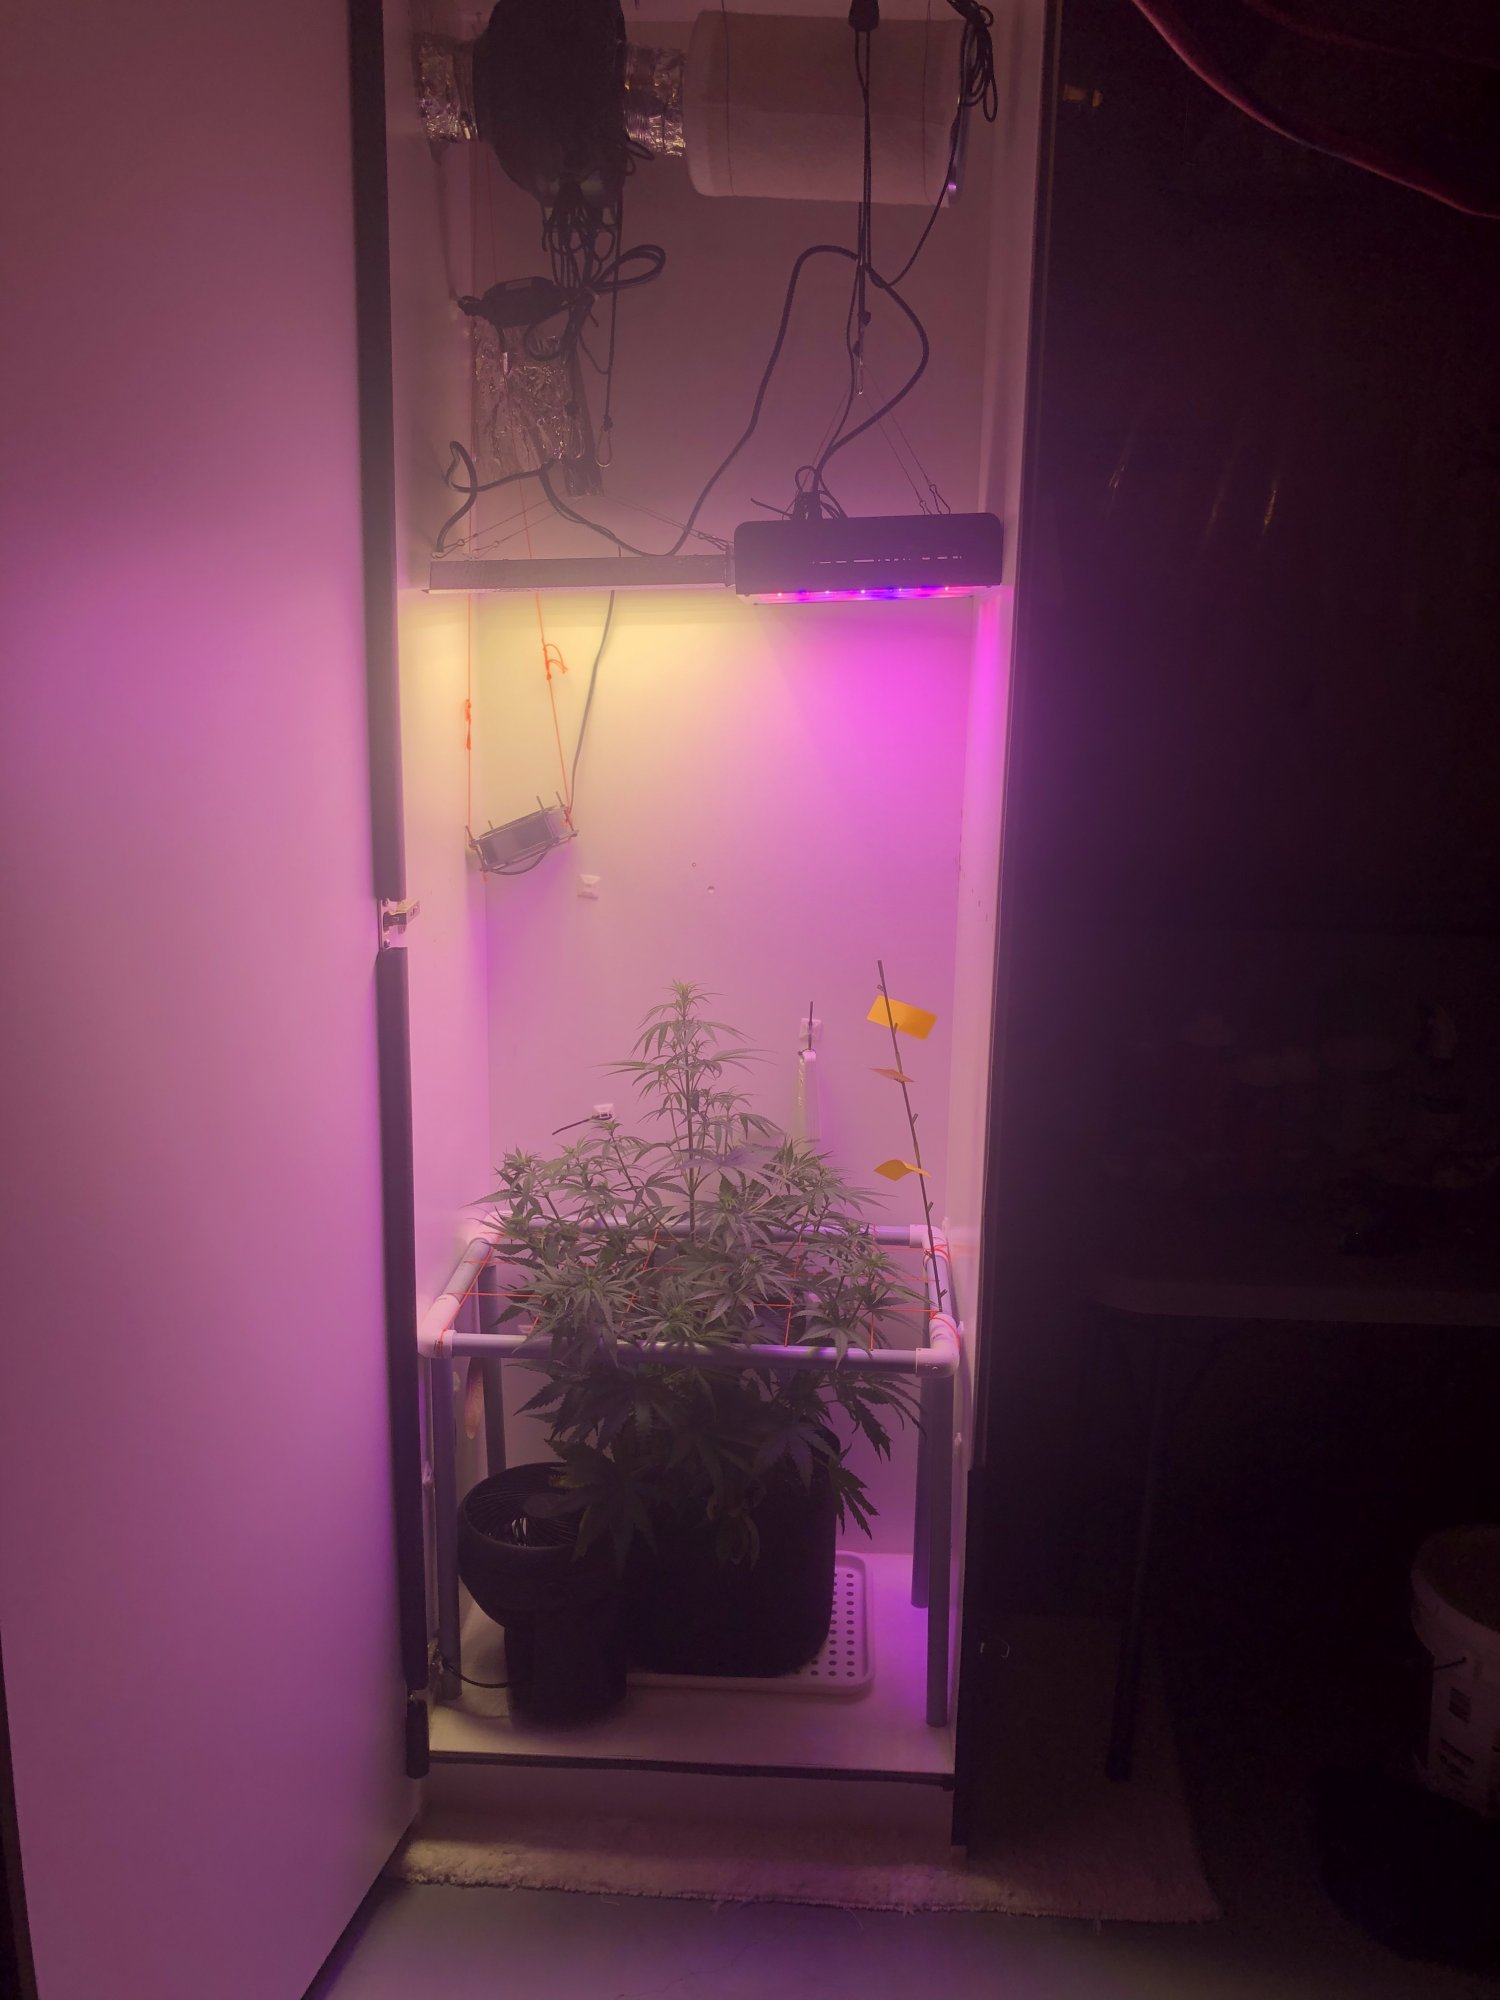 My perpetual cabinet grow